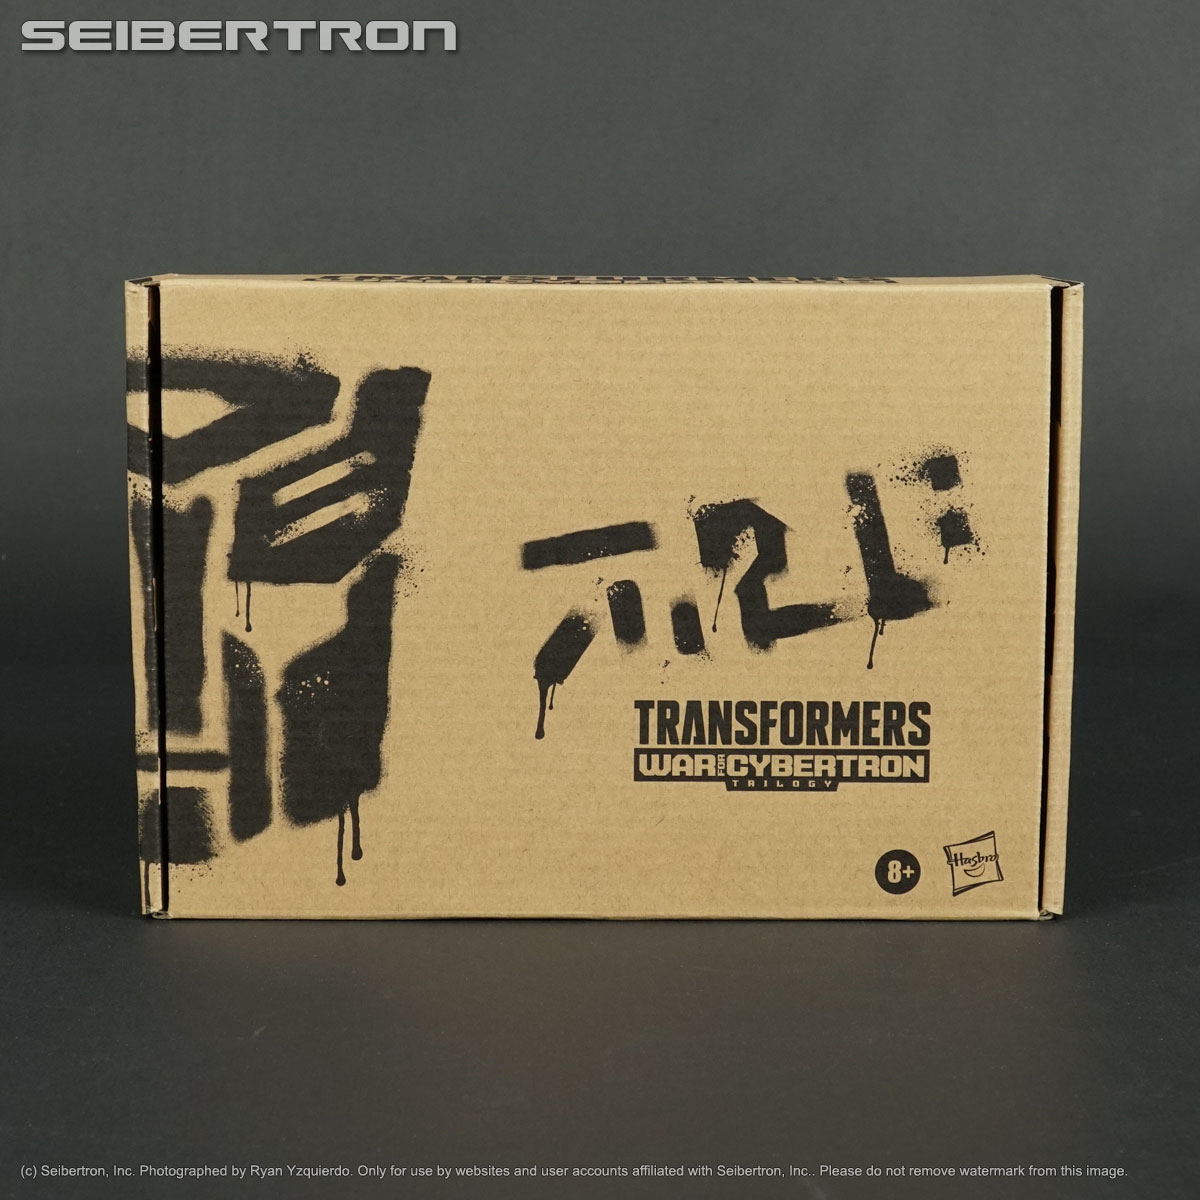 Transformers News: New Transformers toys at the Seibertron Store - February 7th, 2023